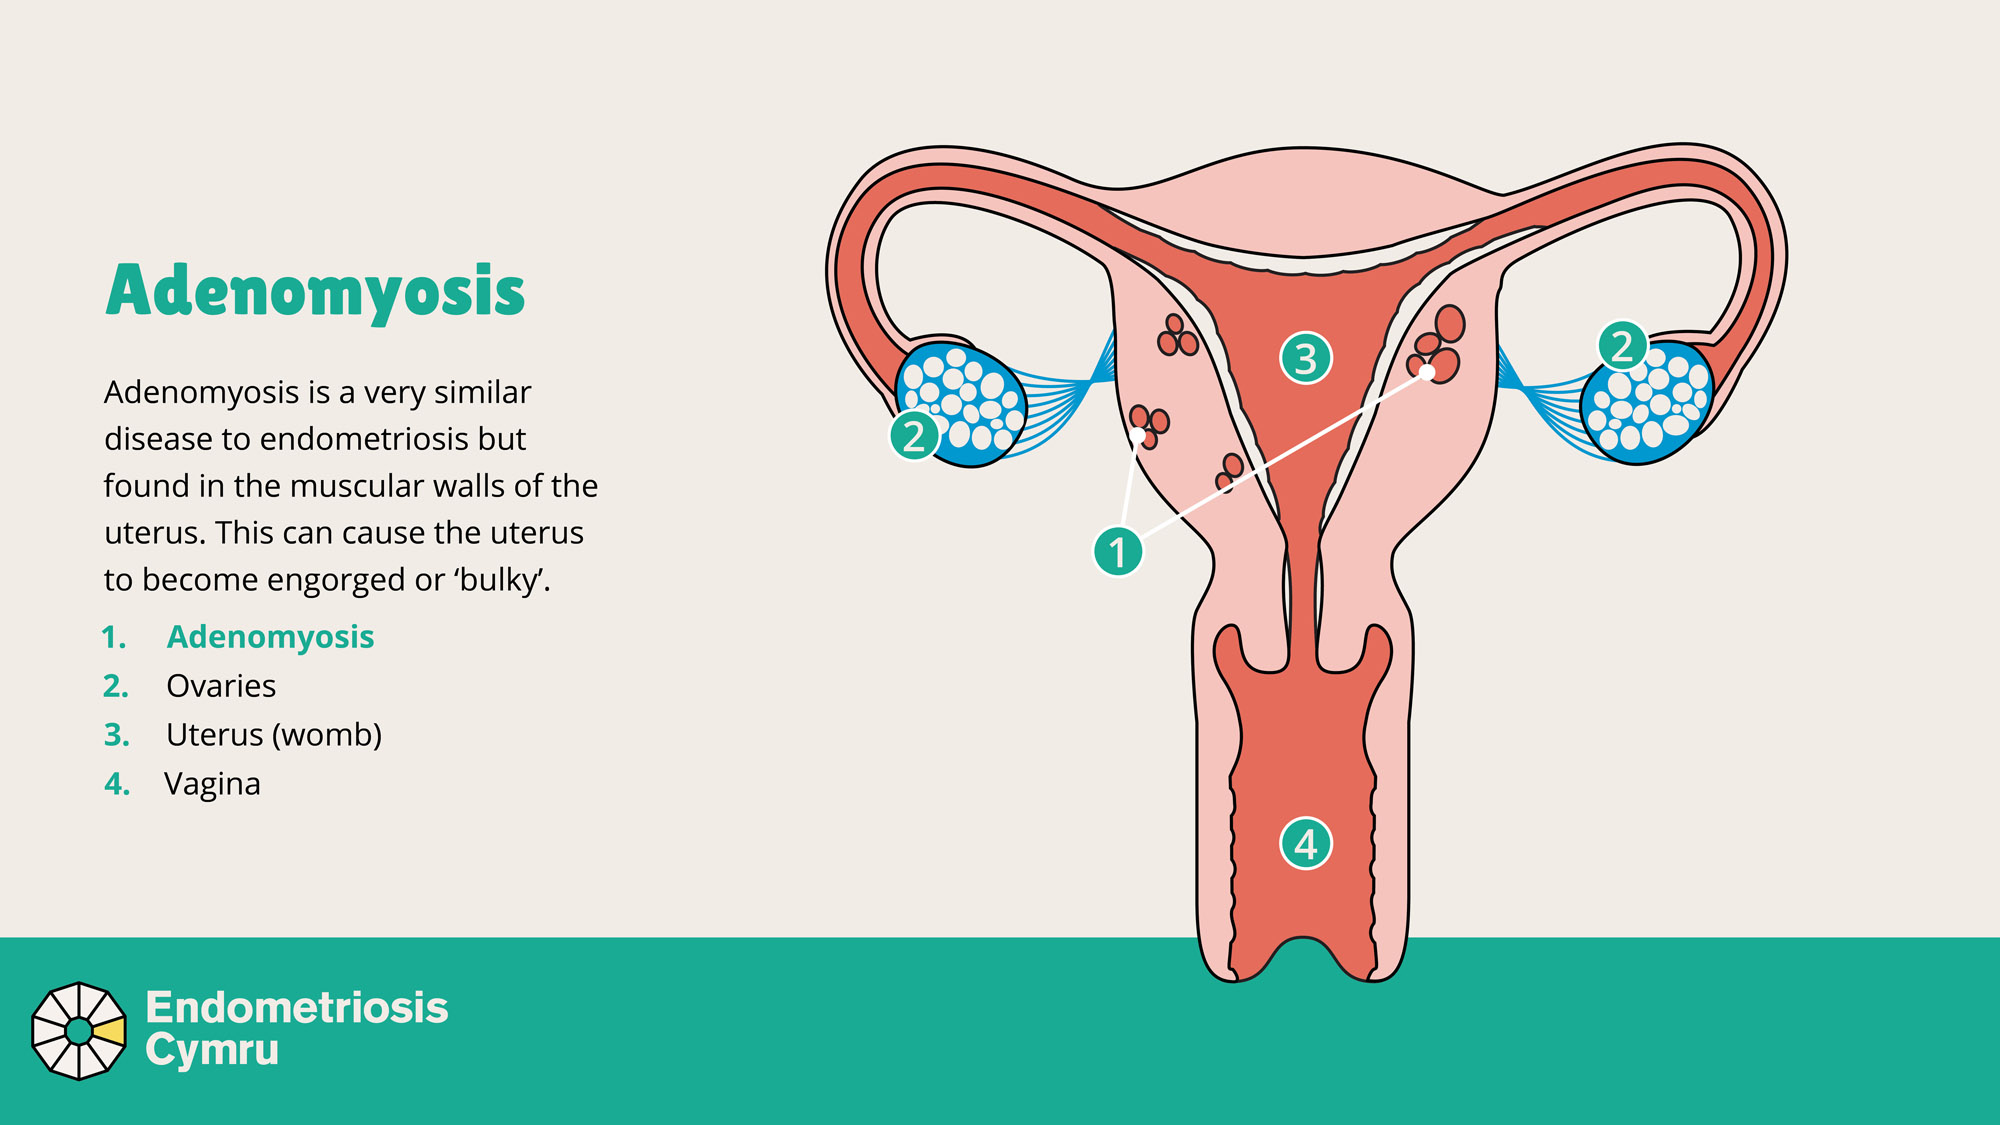 An image showing adenomyosis in the uterus